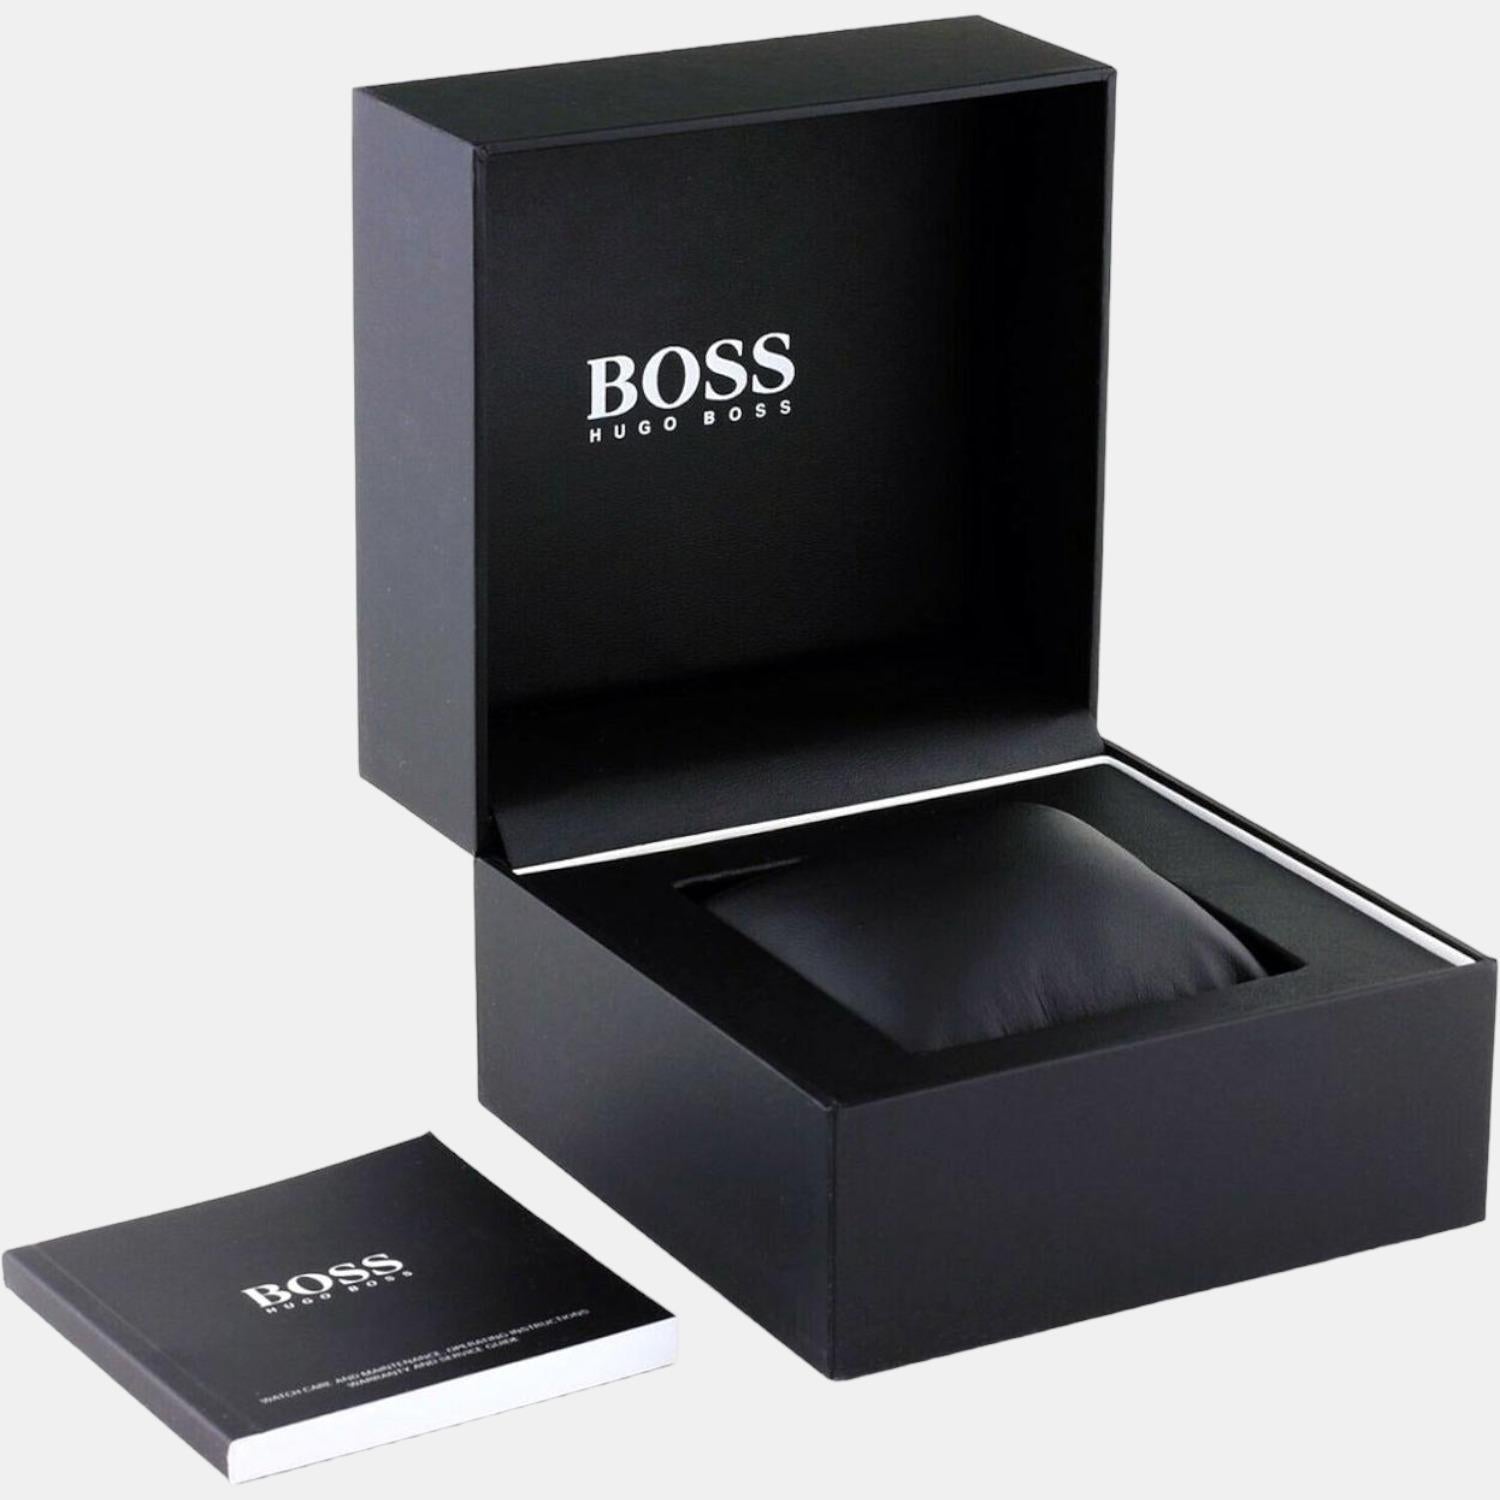 Boss Male Blue Analog Leather Watch | Boss – Just In Time